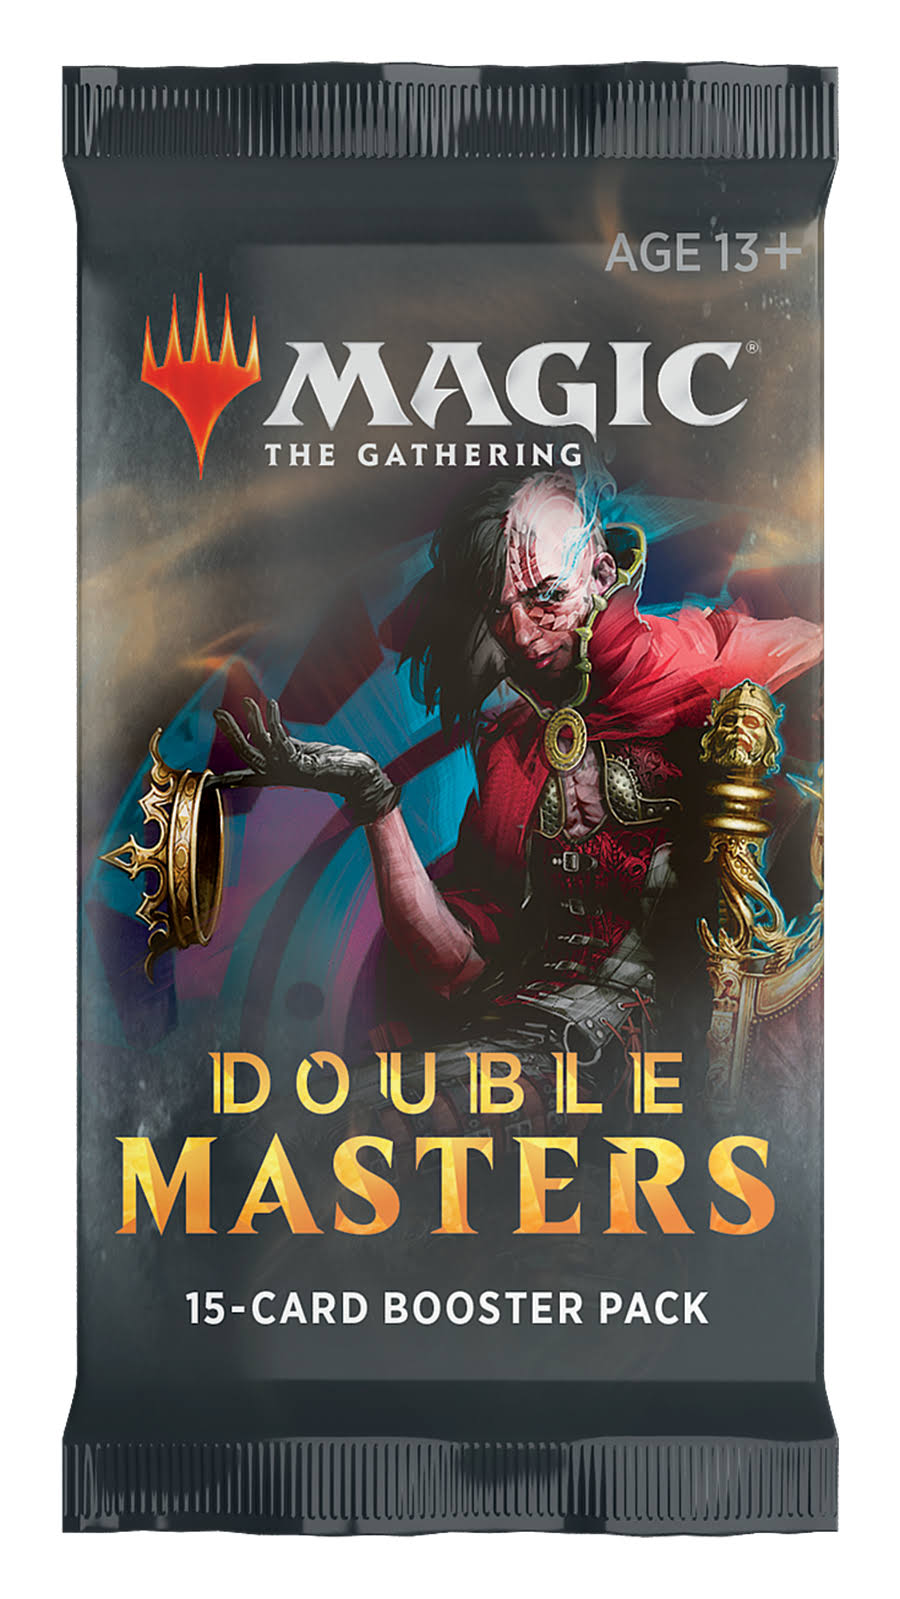 Magic: The Gathering Booster Pack - DOUBLE MASTERS